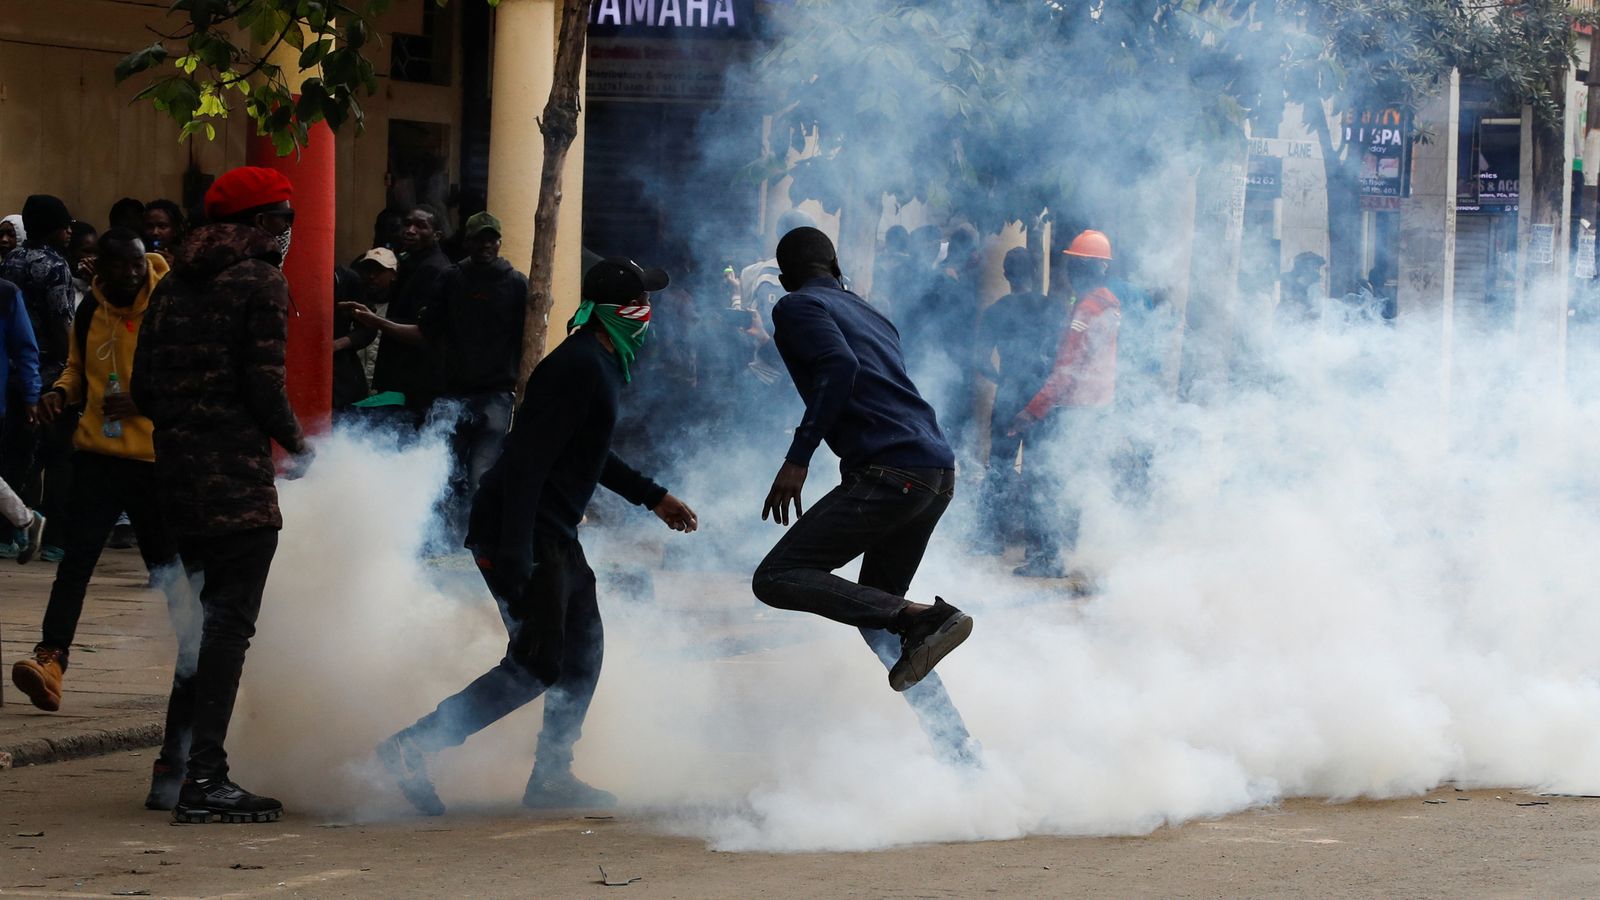 Kenyans see fellow protesters killed in front of them but they choose to keep fighting